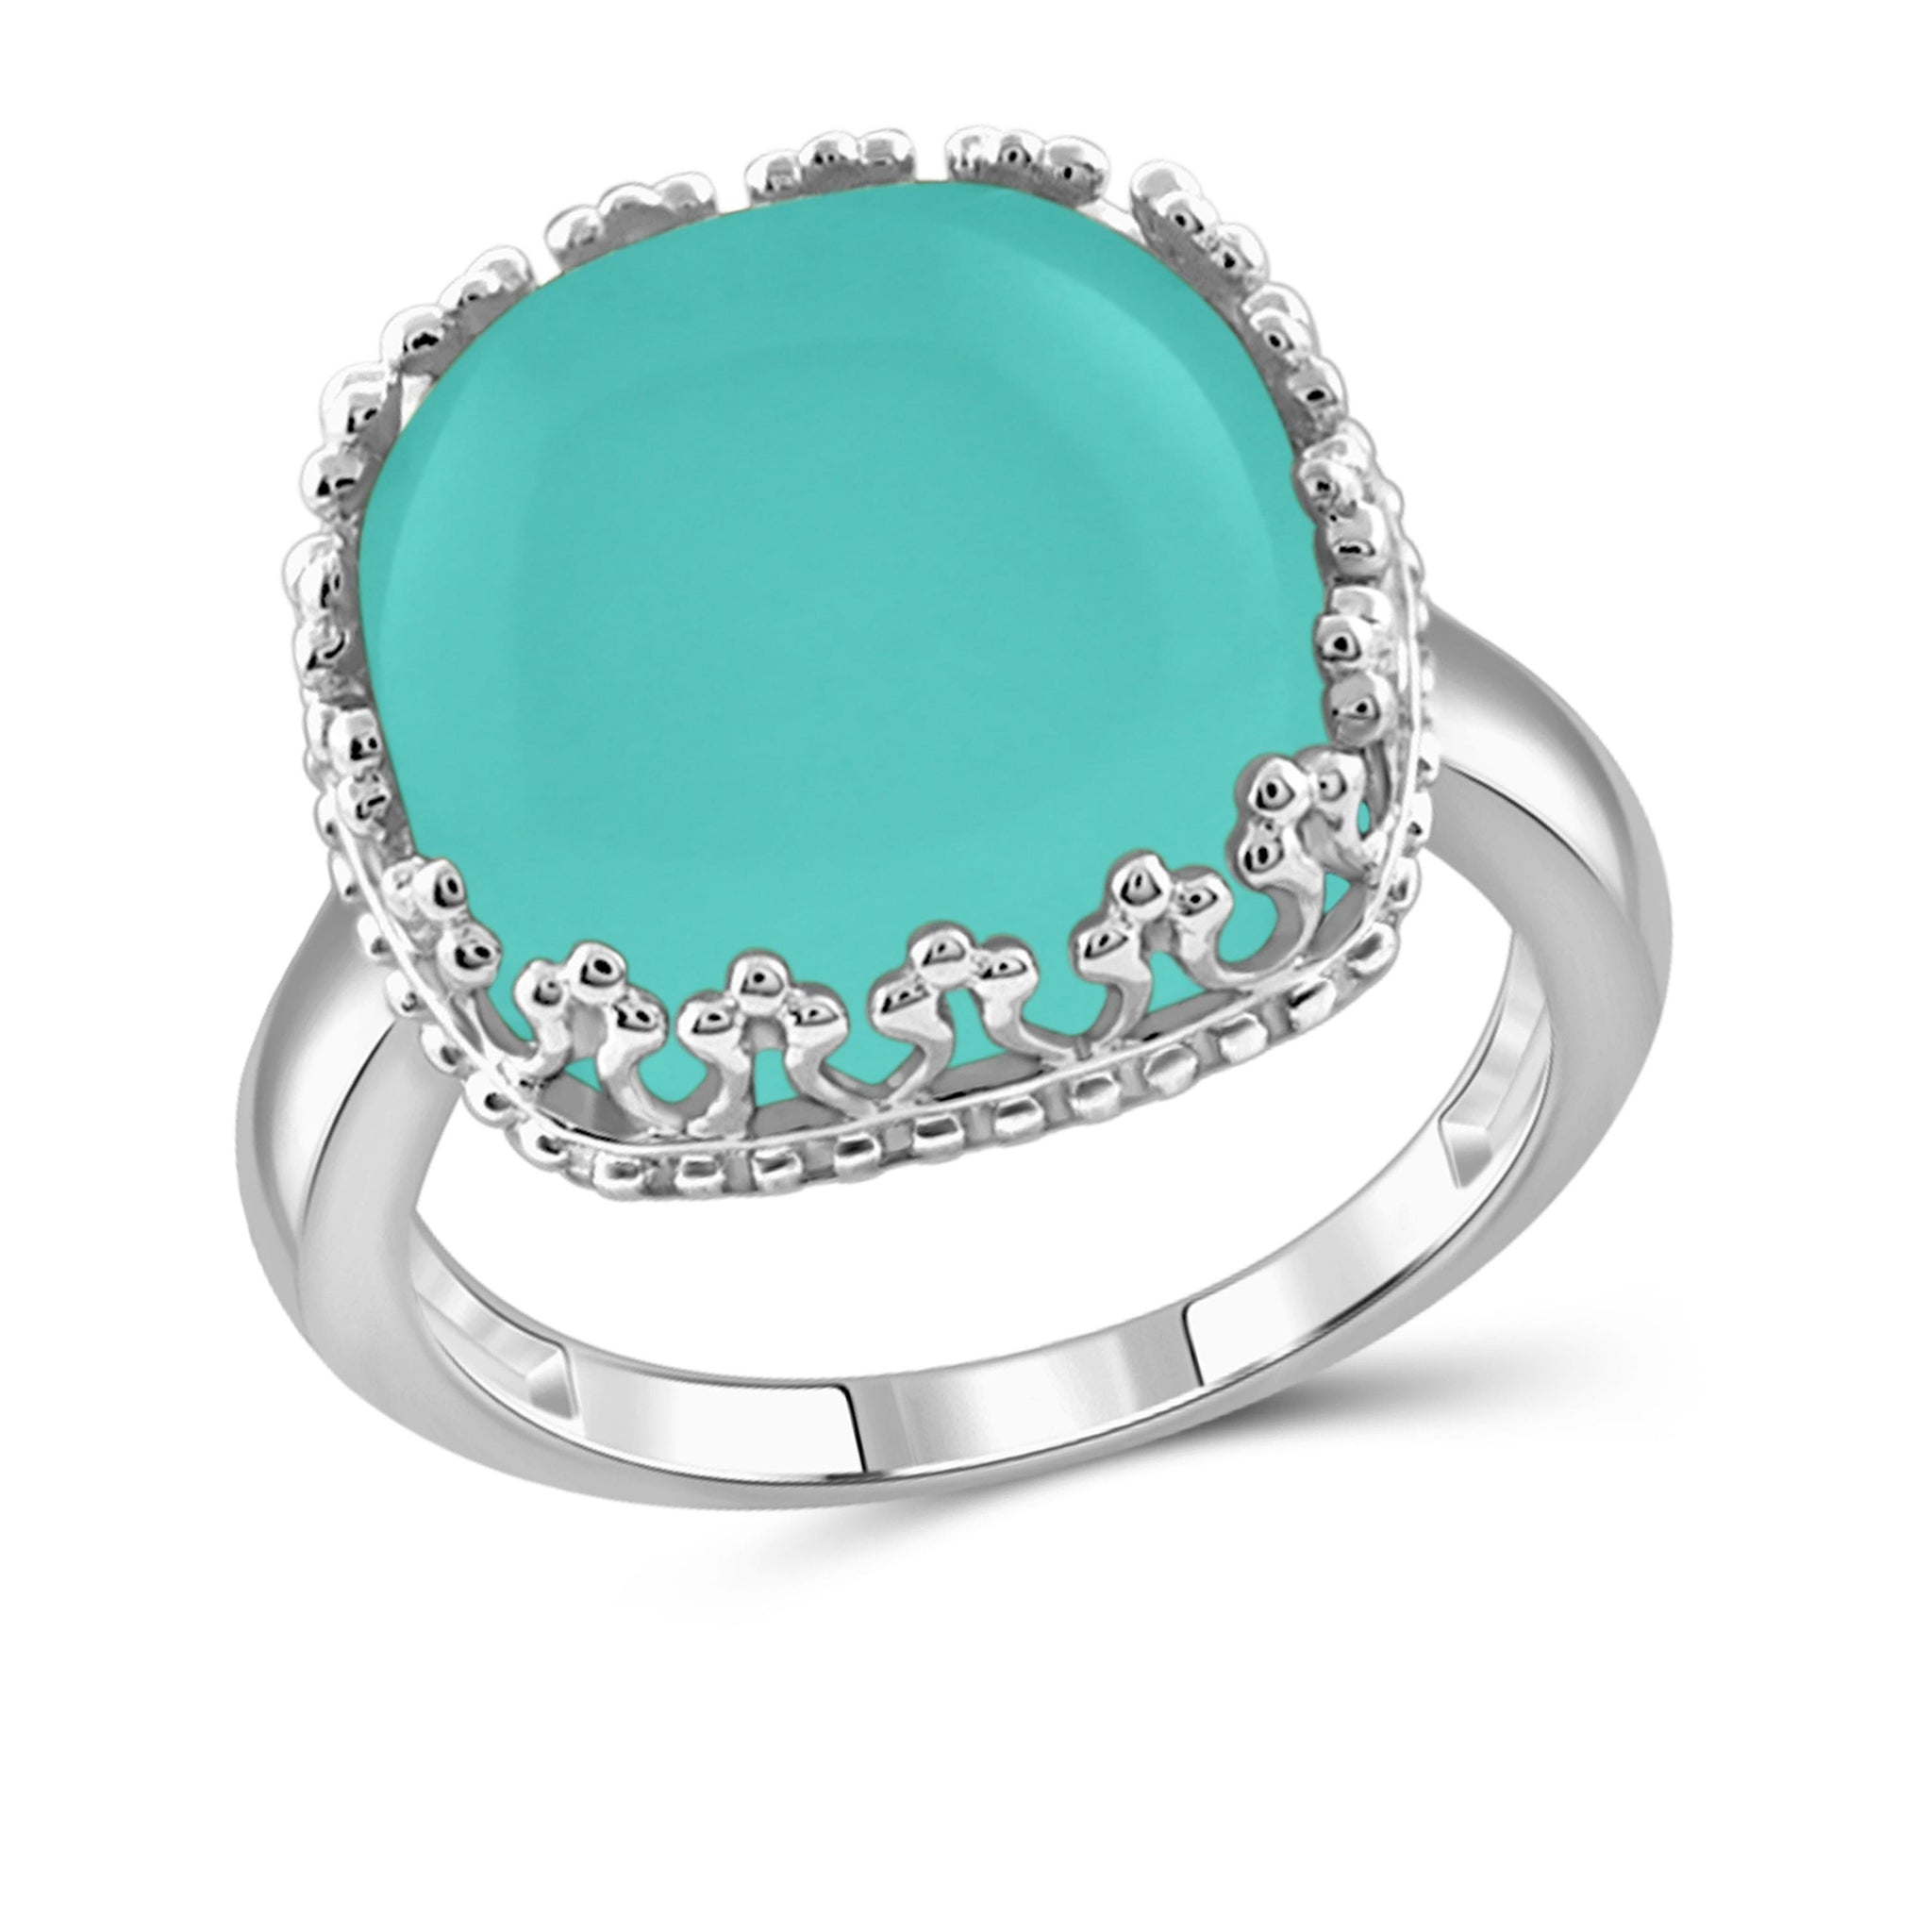 JewelonFire 10 3/4 Carat T.G.W. Chalcedony Sterling Silver Fashion Ring